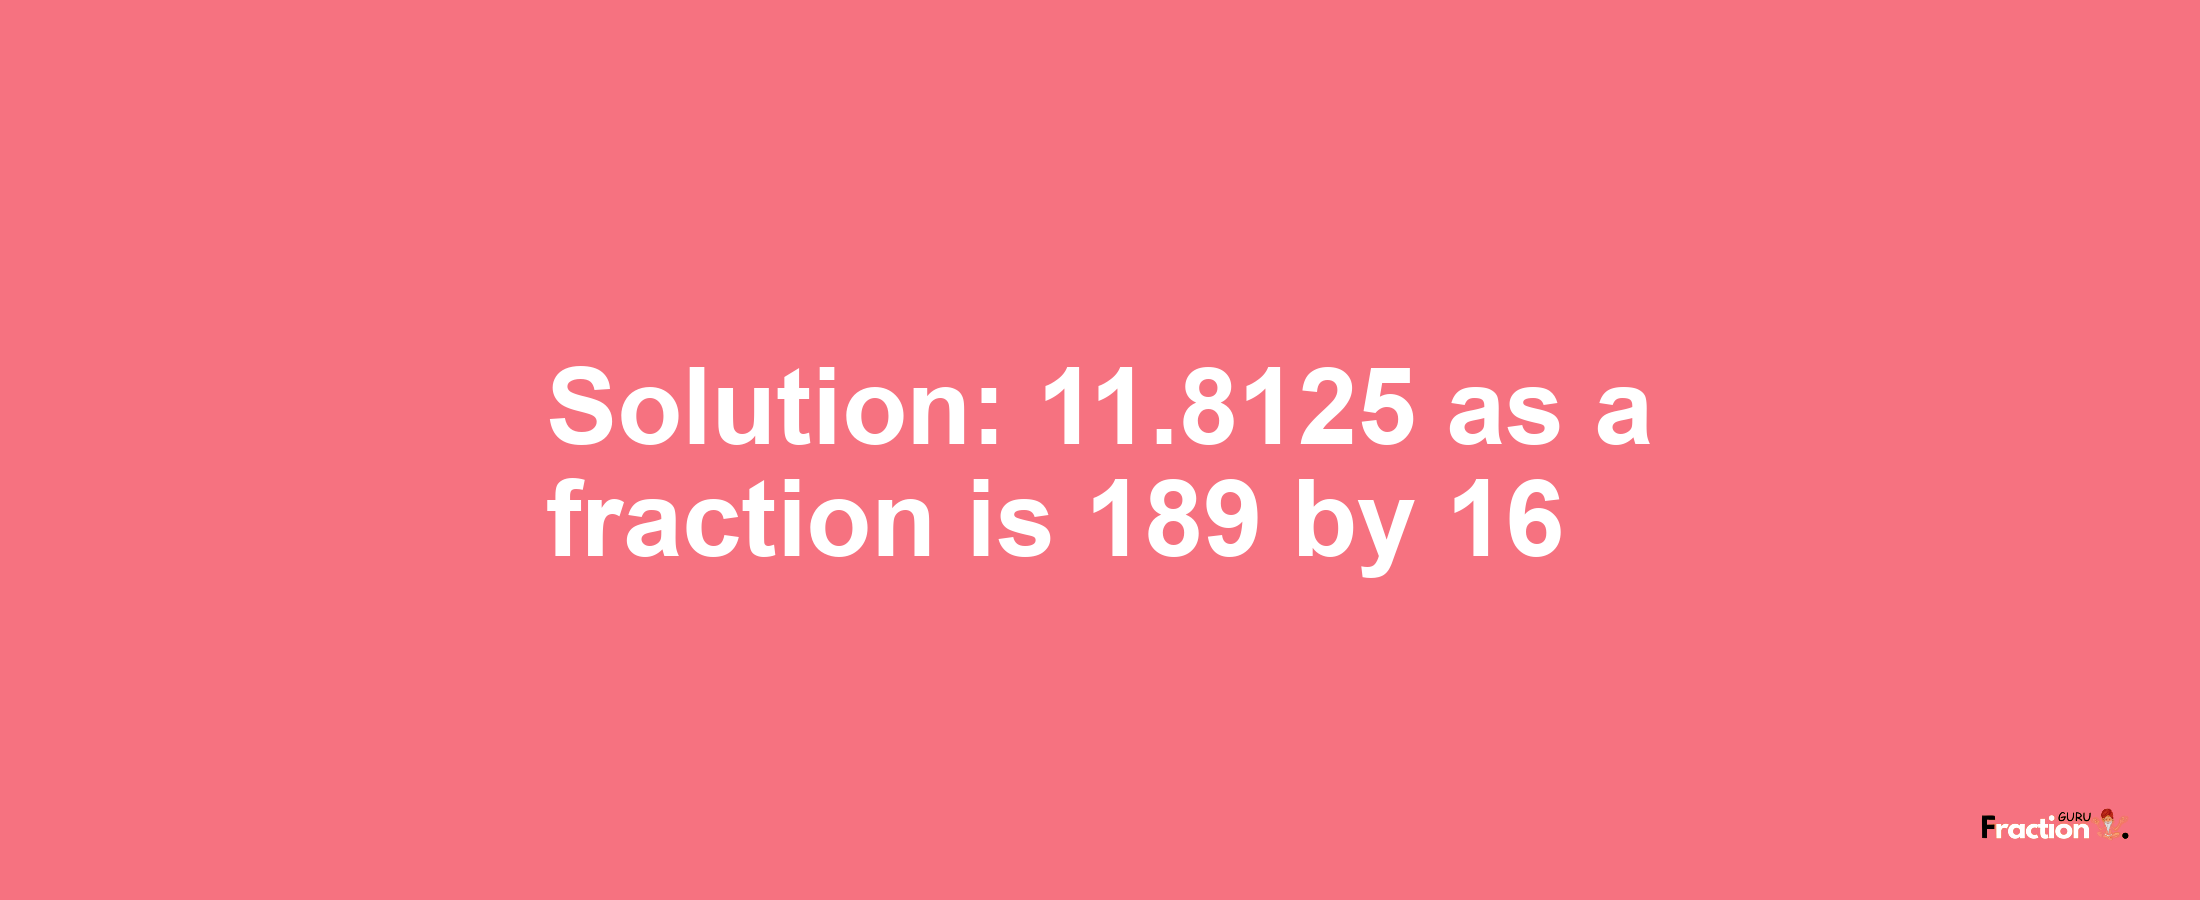 Solution:11.8125 as a fraction is 189/16